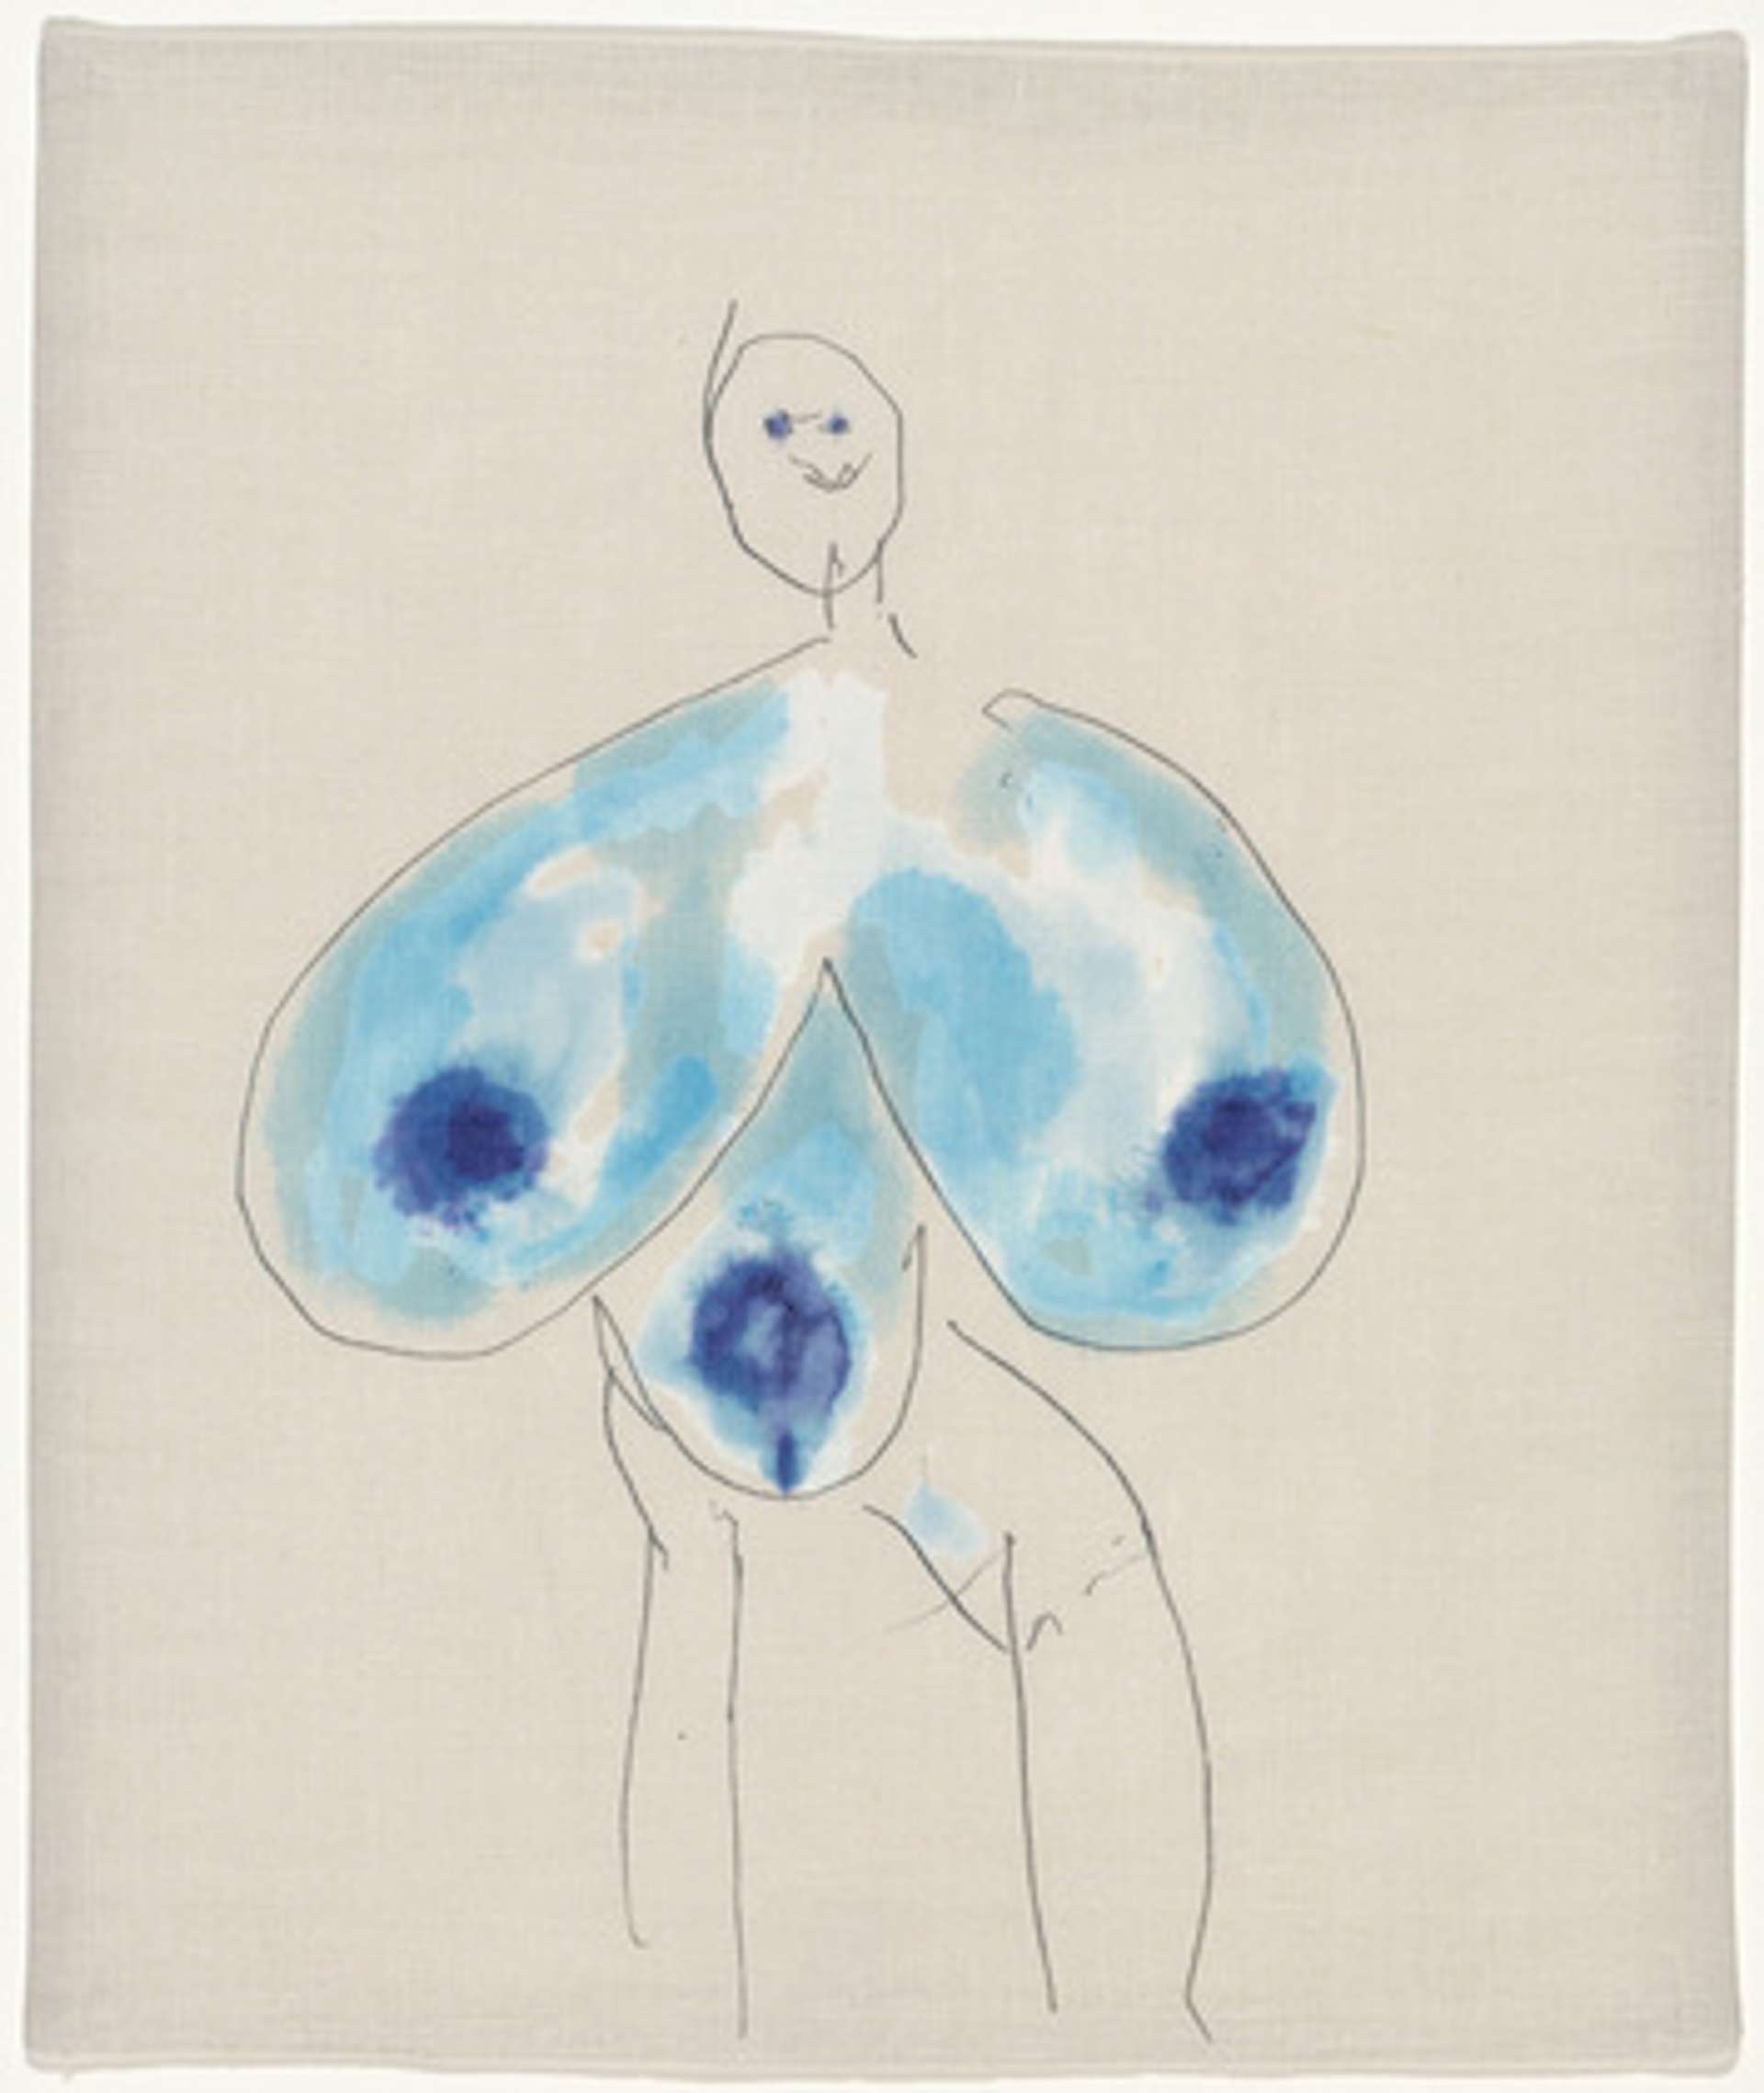 The Fragile 28 - Signed Print by Louise Bourgeois 2007 - MyArtBroker